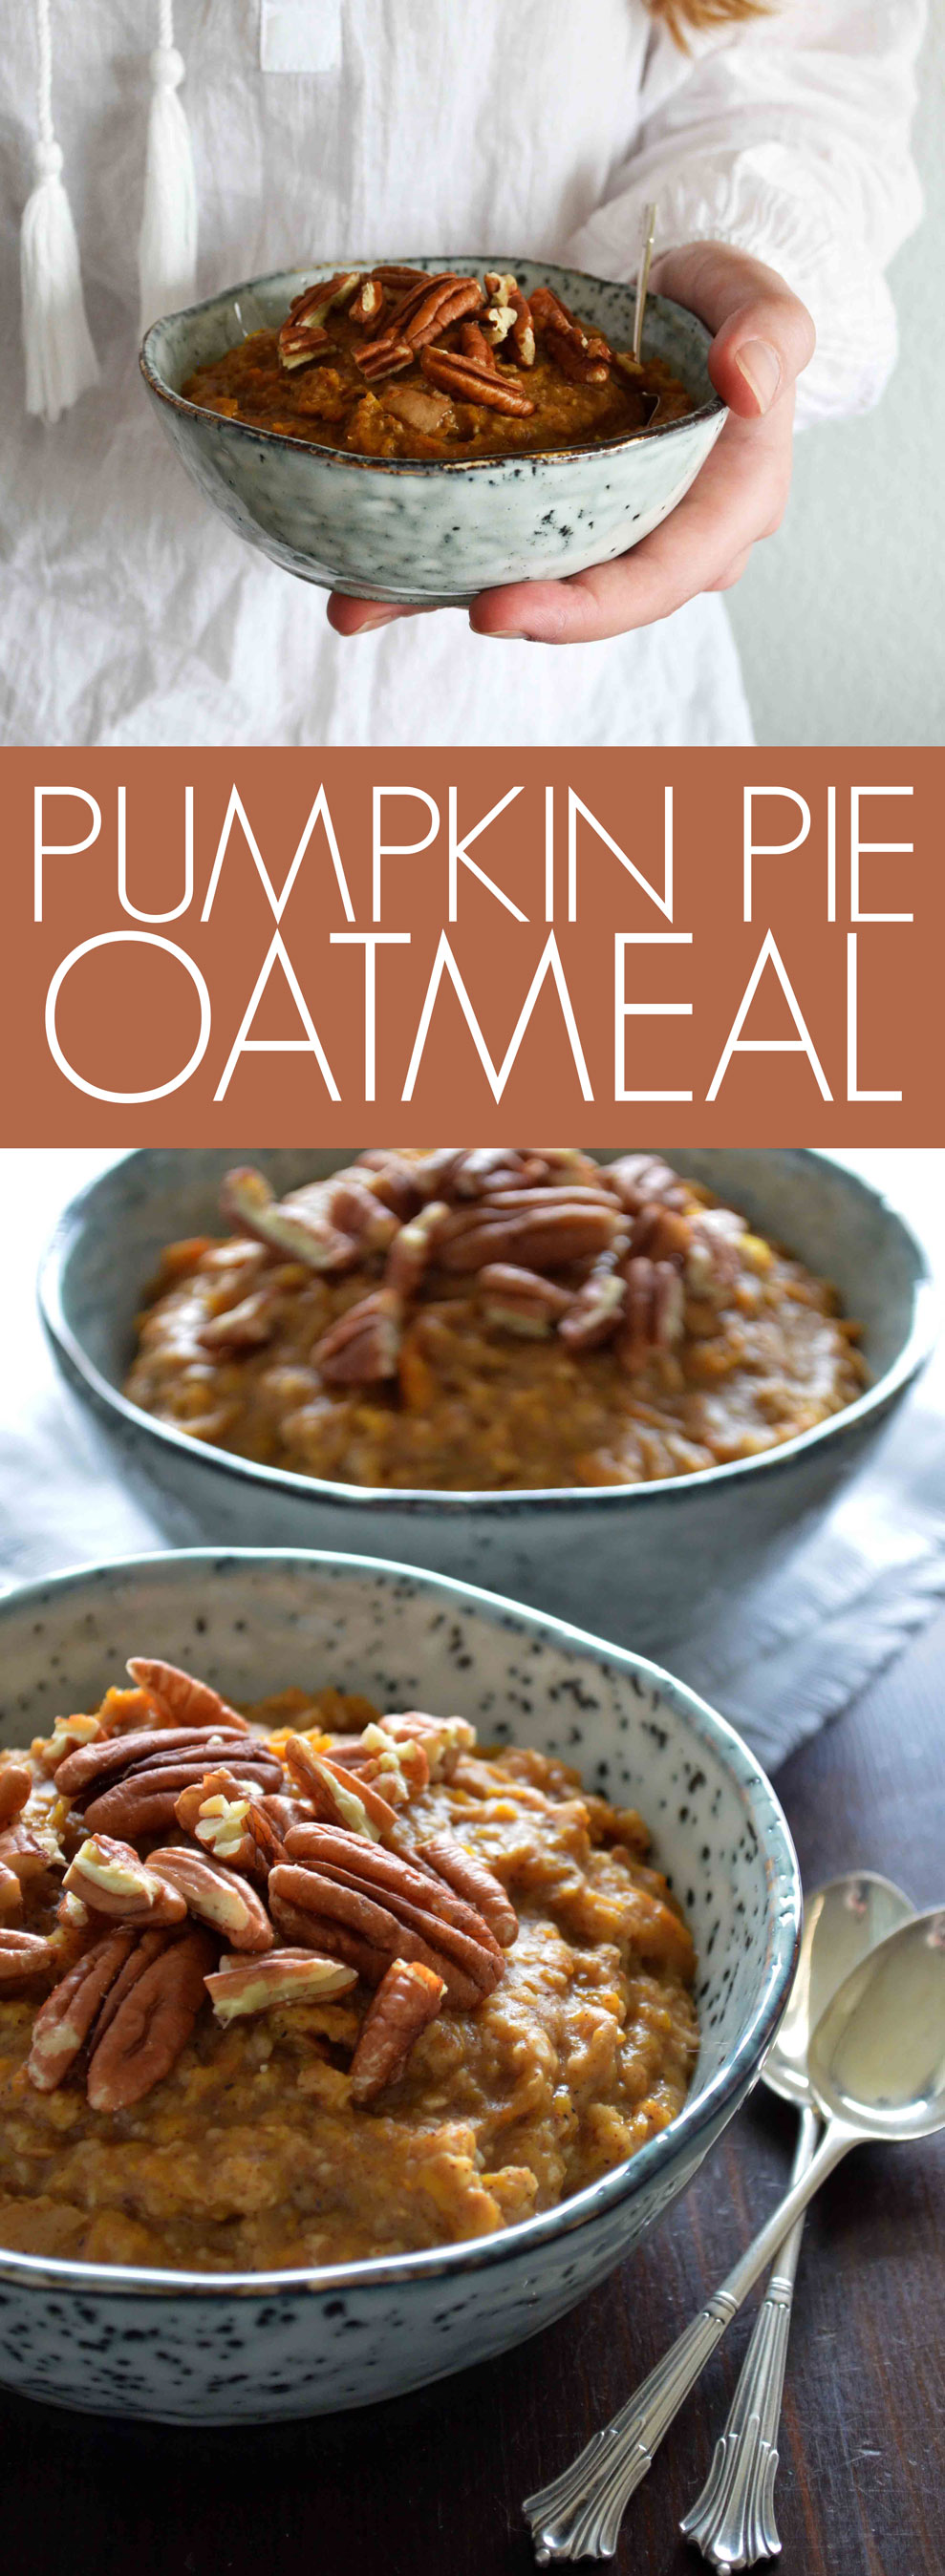 A recipe for Pumpkin Pie Oatmeal. A delicious breakfast with hints of vanilla, ginger, cinnamon and nutmeg. Who said you couldn't have pie for breakfast?! | by That Healthy Kitchen